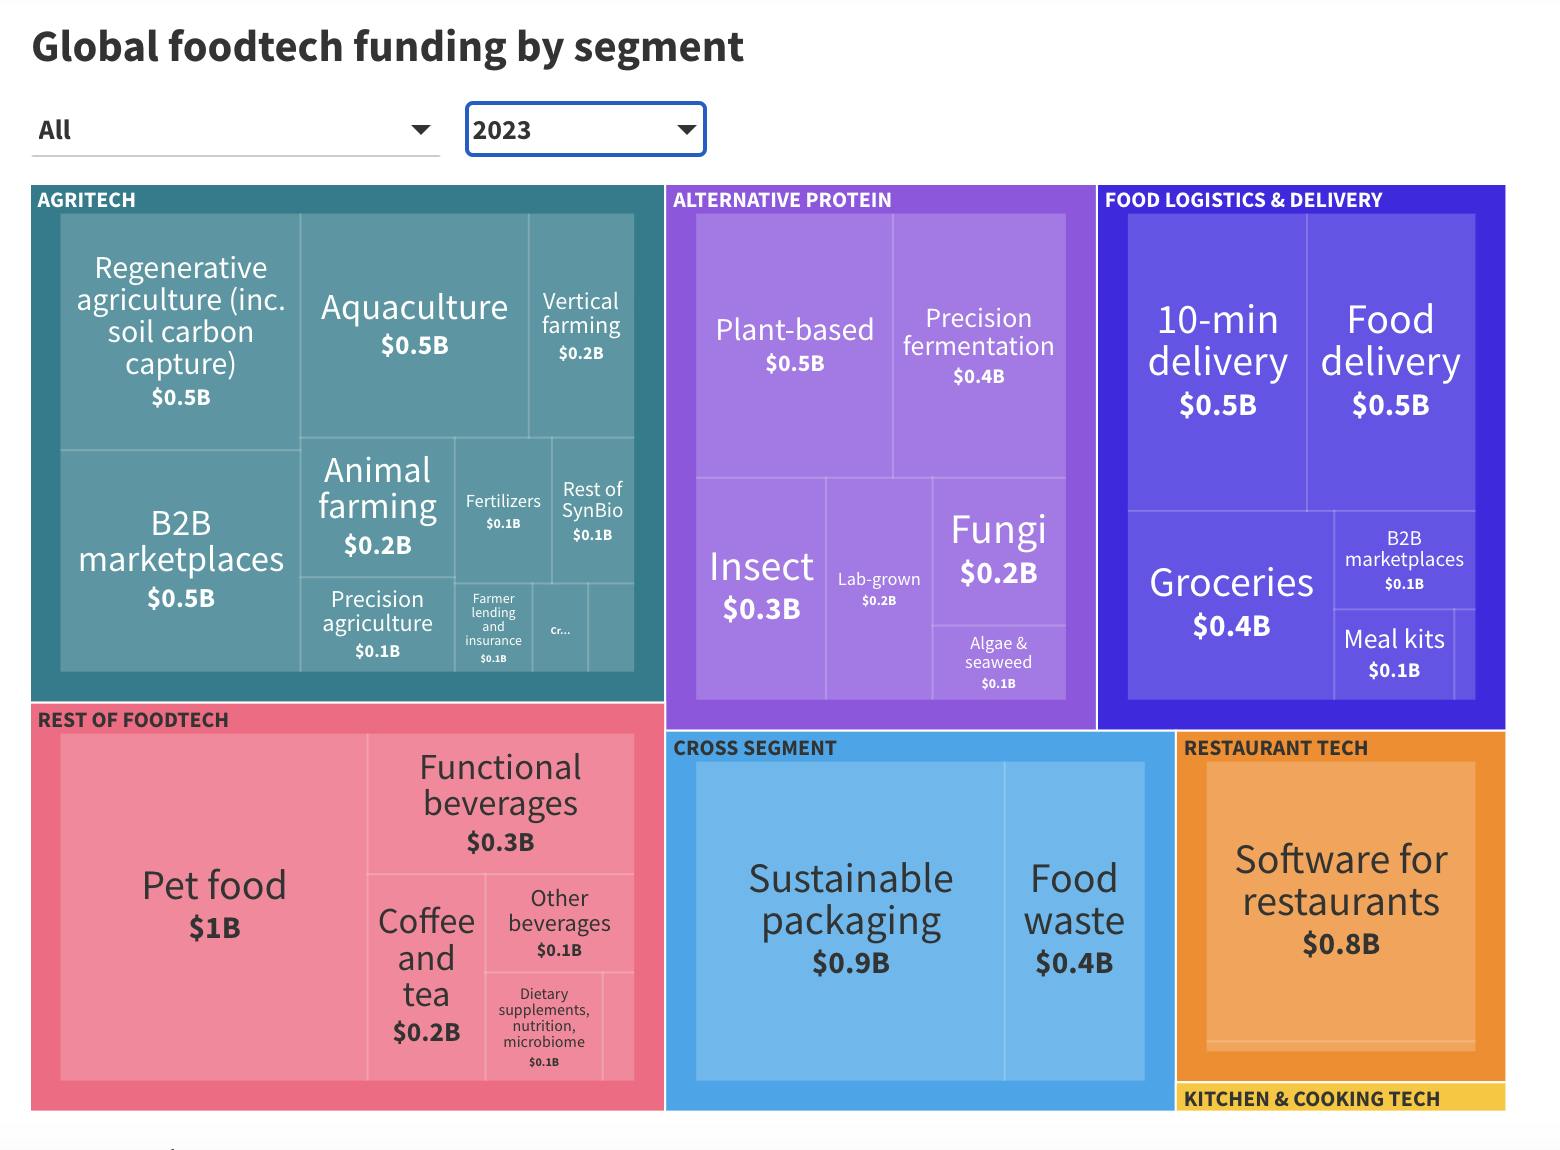 Global foodtech funding by segment, 2023